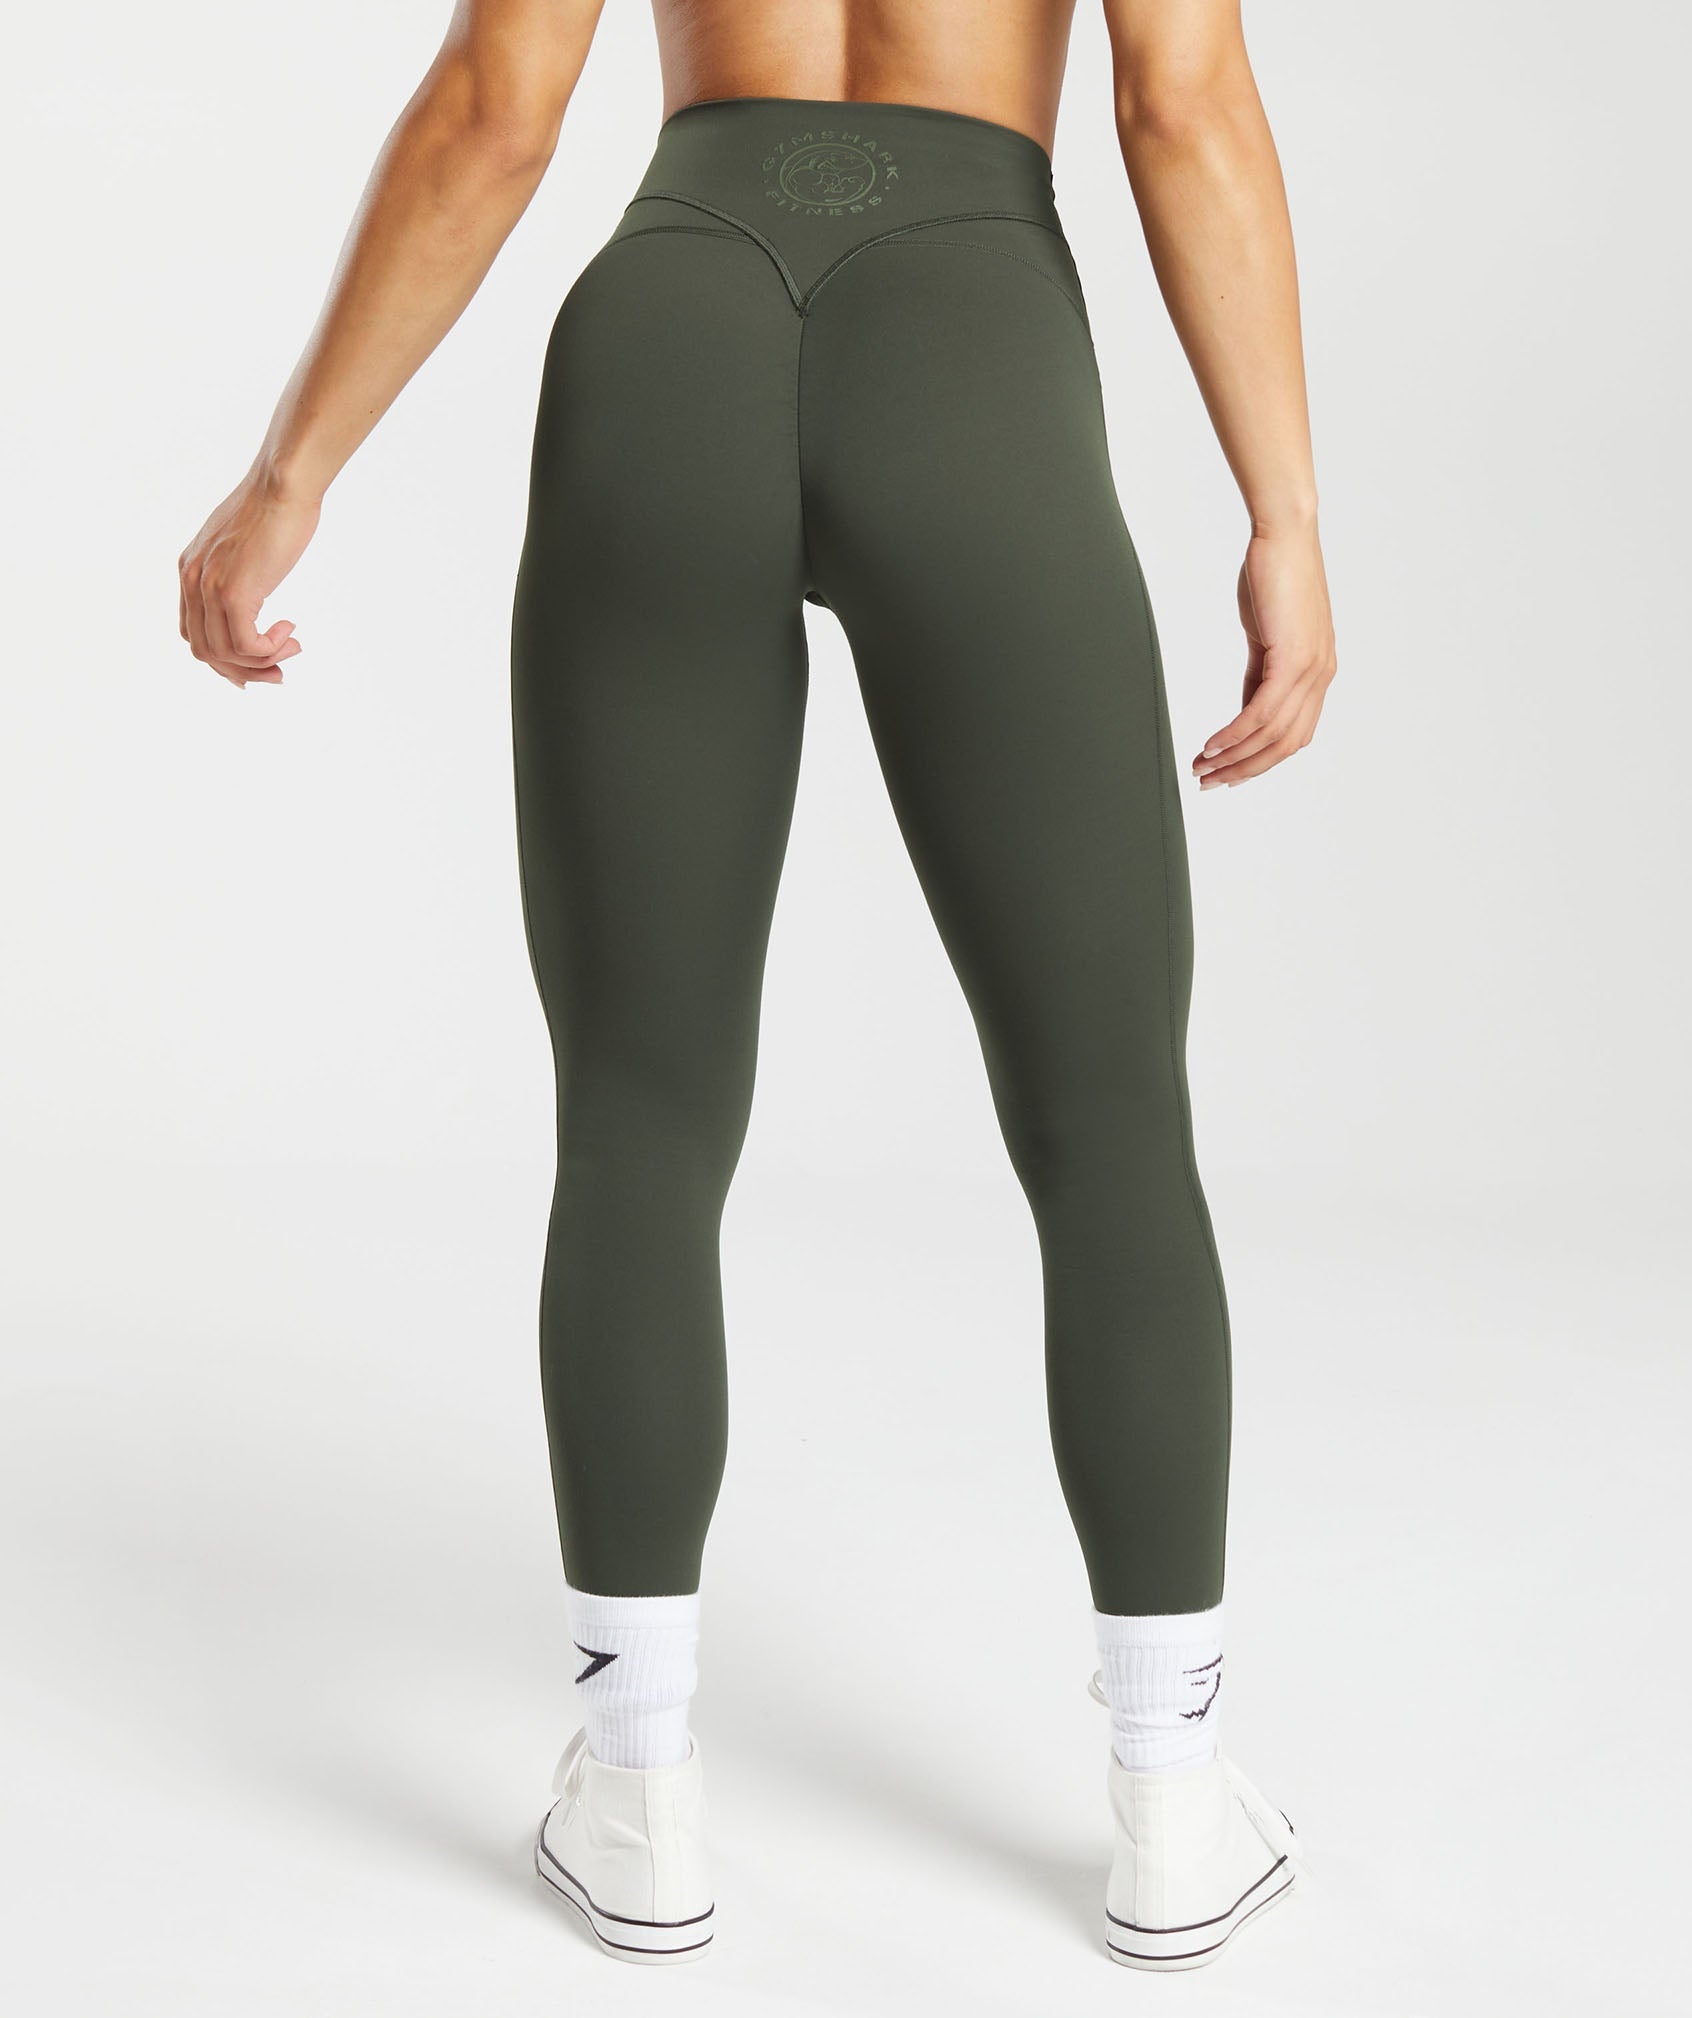 Women's Thick Seamfree Ruched Bum Power Gym Leggings